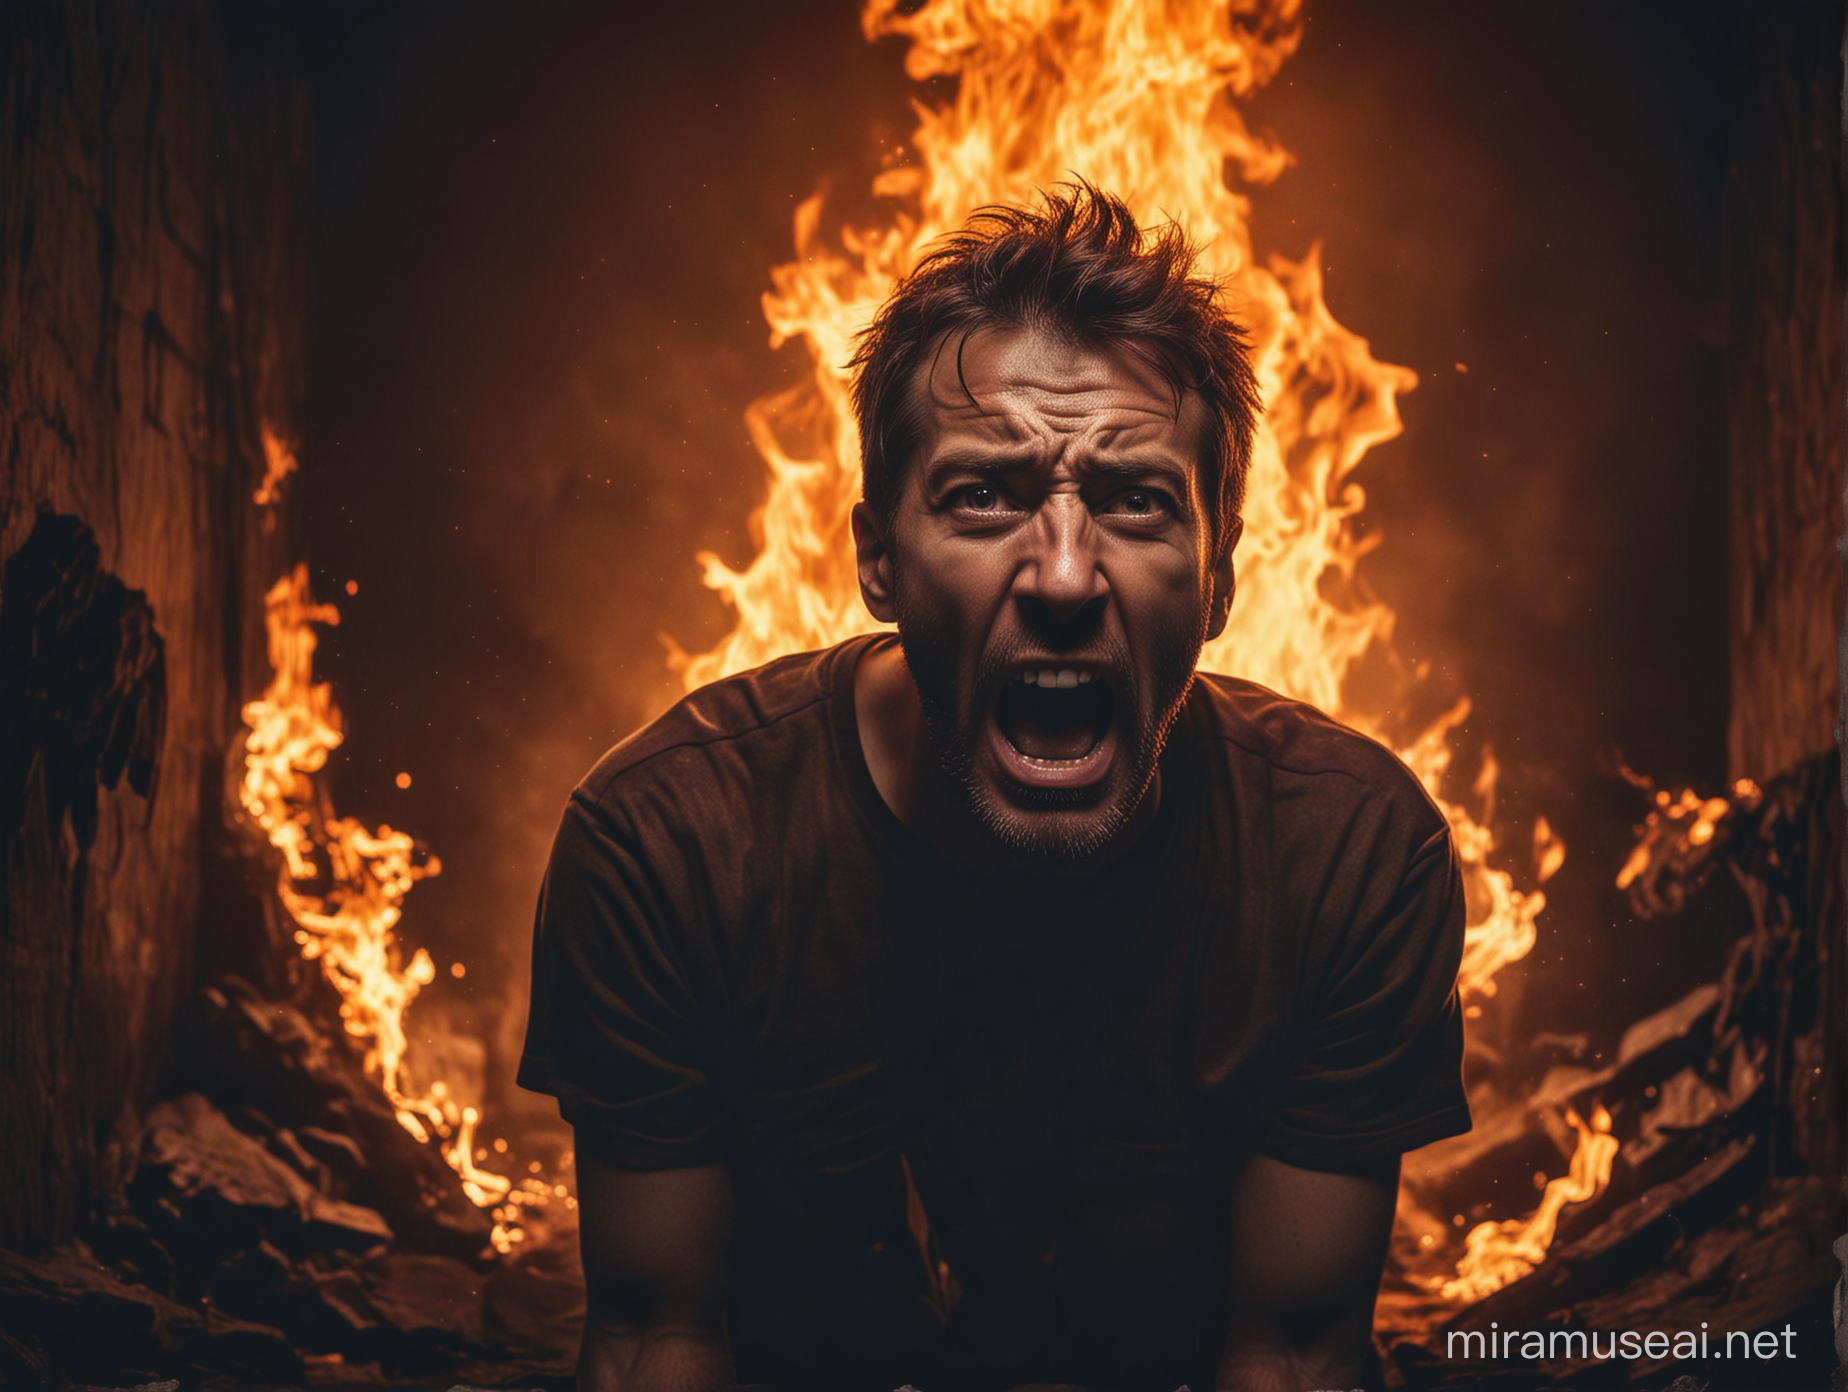 Tormented Man in Infernal Flames Symbolic Depiction of Agony and Despair